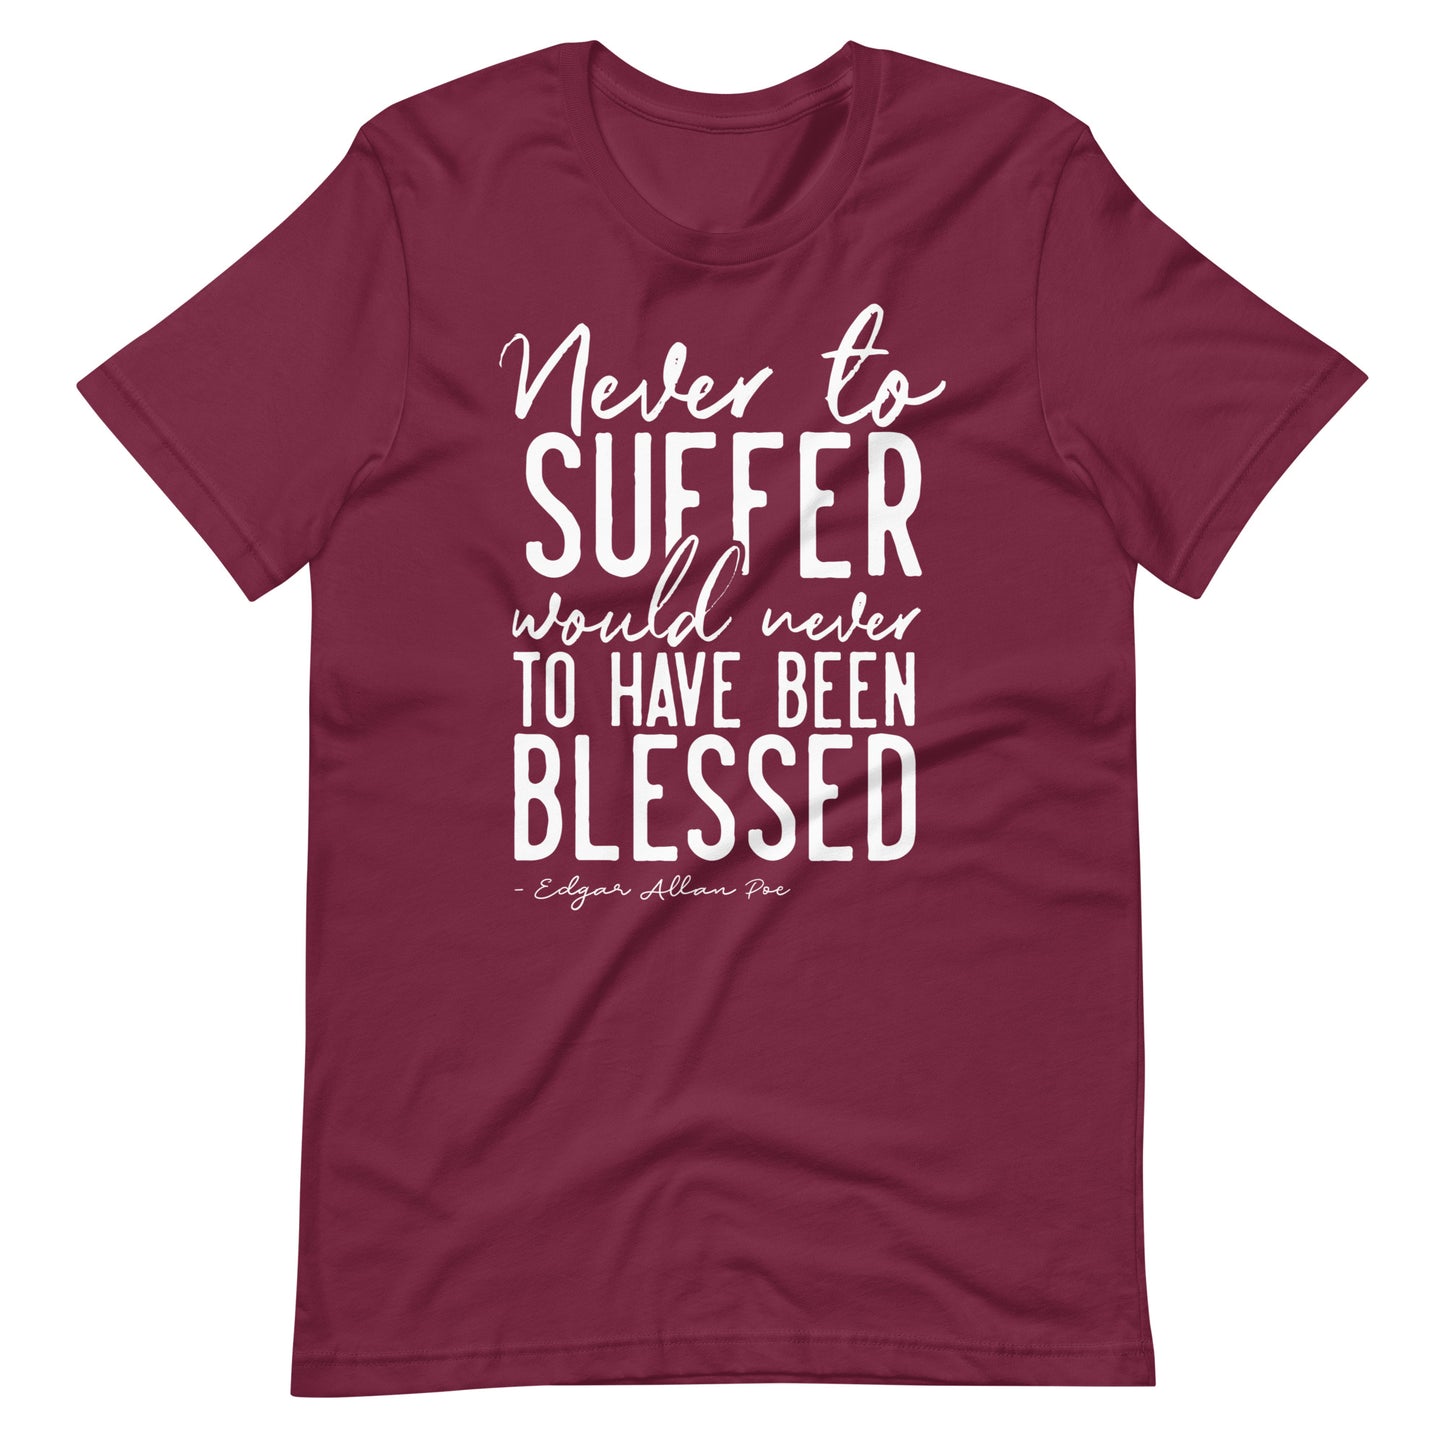 Never to Suffer Edgar Allan Poe Quote - Men's t-shirt - Maroon Front